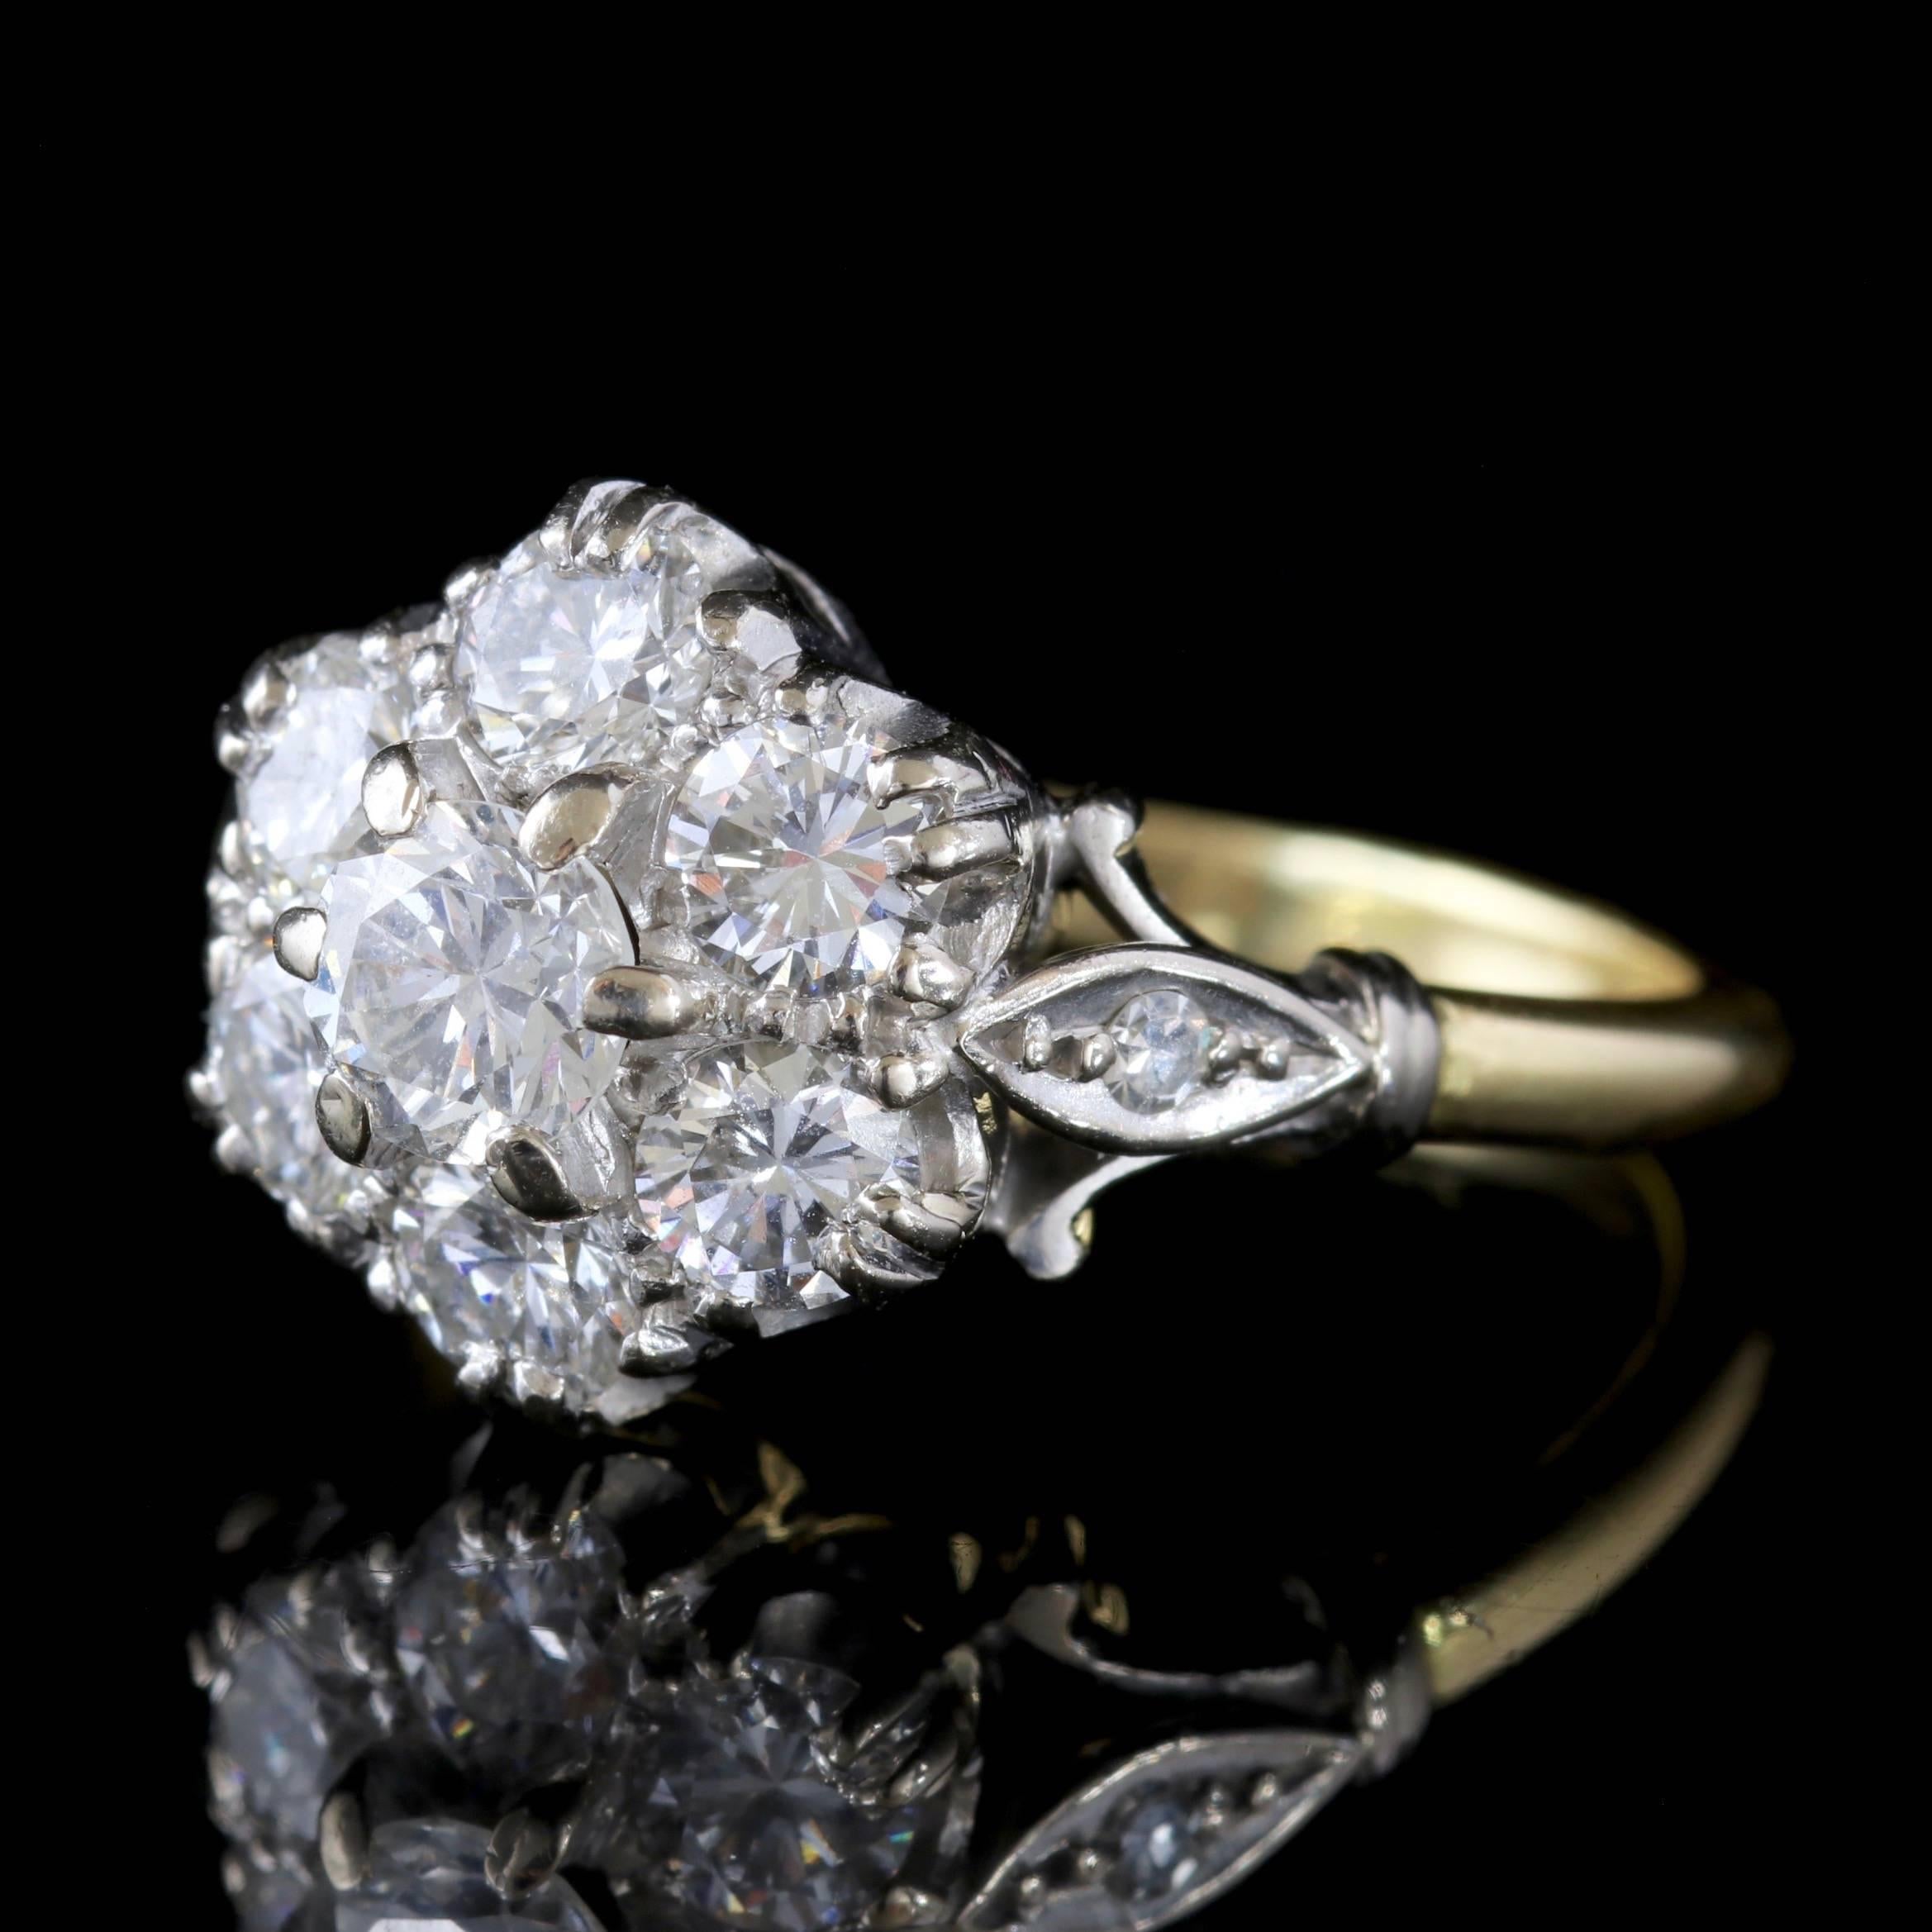 To read more please click continue reading below-

This stunning Antique 18ct Gold, Diamond cluster ring is Edwardian, Circa 1915.

The ring boasts a fabulous 0.43ct Diamond in the centre with six outer Diamonds which measure 0.18ct each. 

The